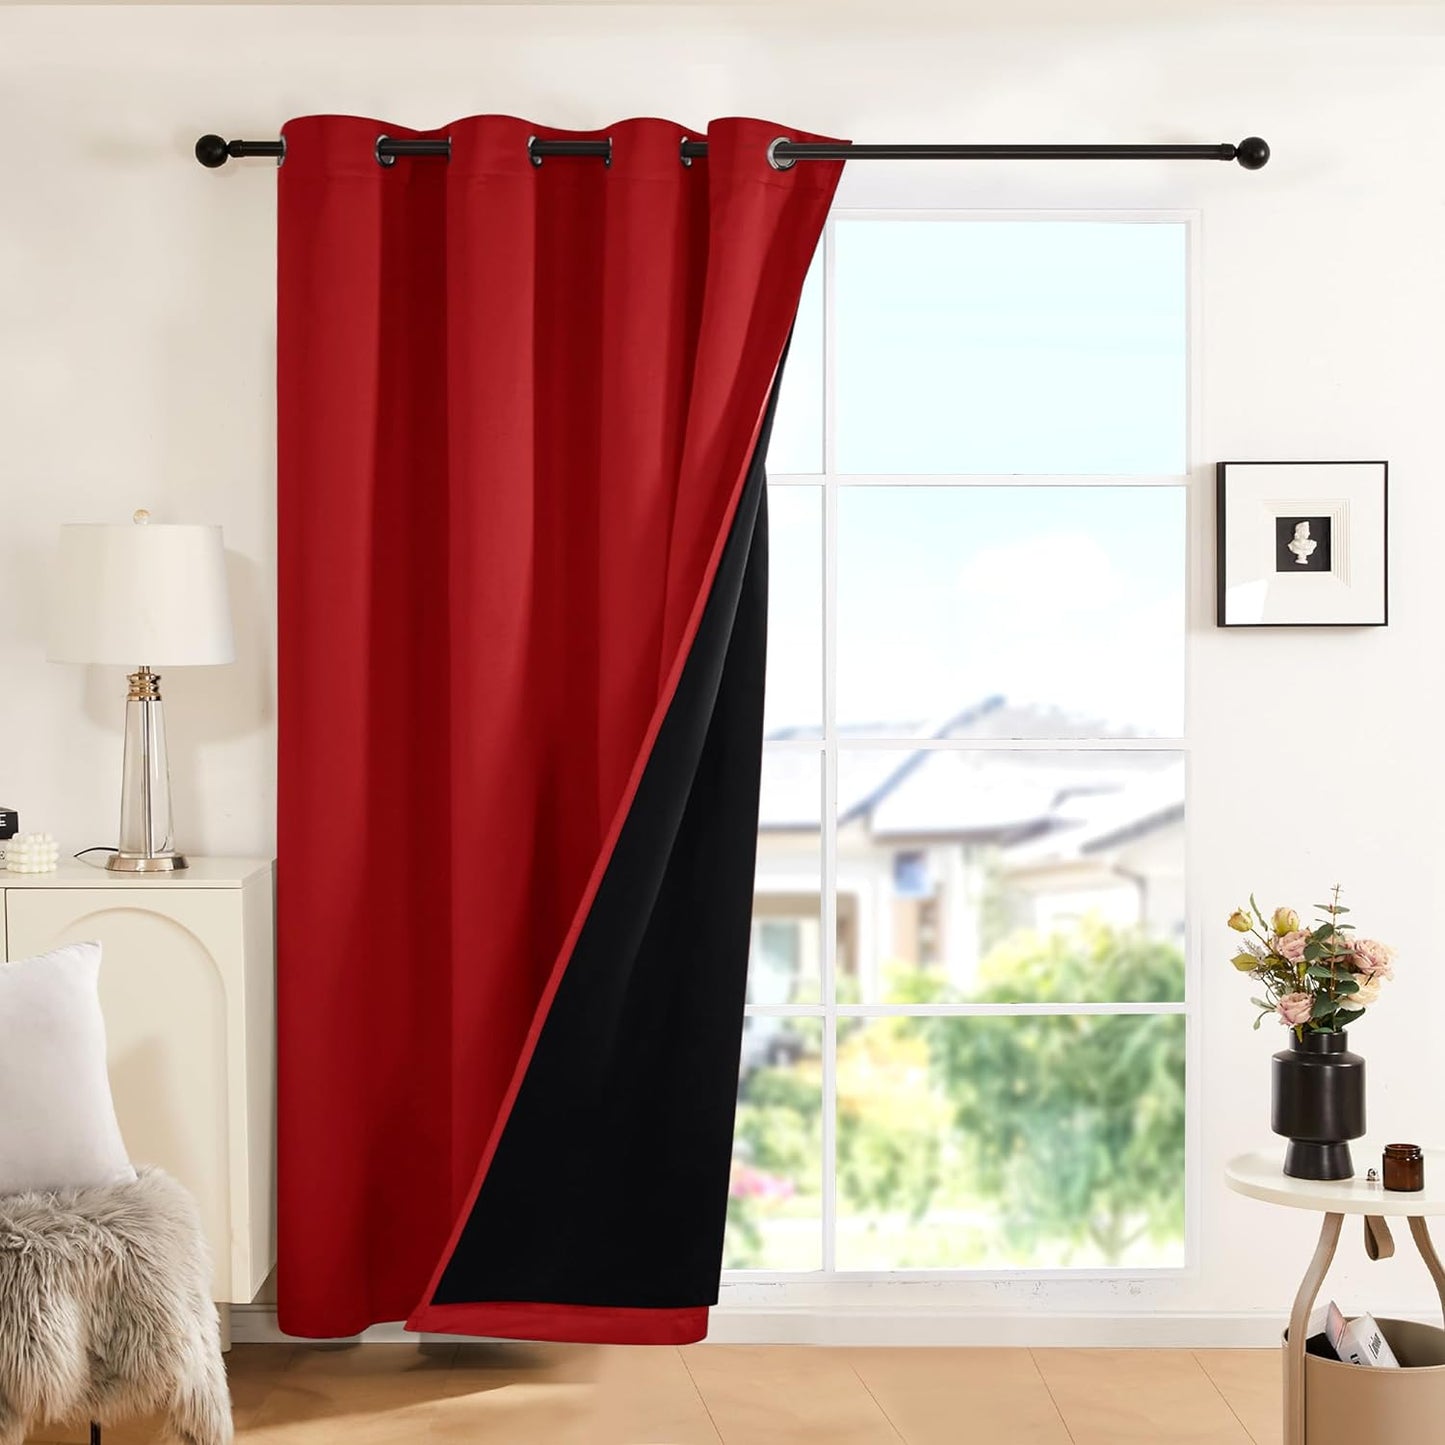 Deconovo 100% White Blackout Curtains, Double Layer Sliding Door Curtain for Living Room, Extra Wide Room Divder Curtains for Patio Door (100W X 84L Inches, Pure White, 1 Panel)  DECONOVO Bright Red 52W X 84L Inch 